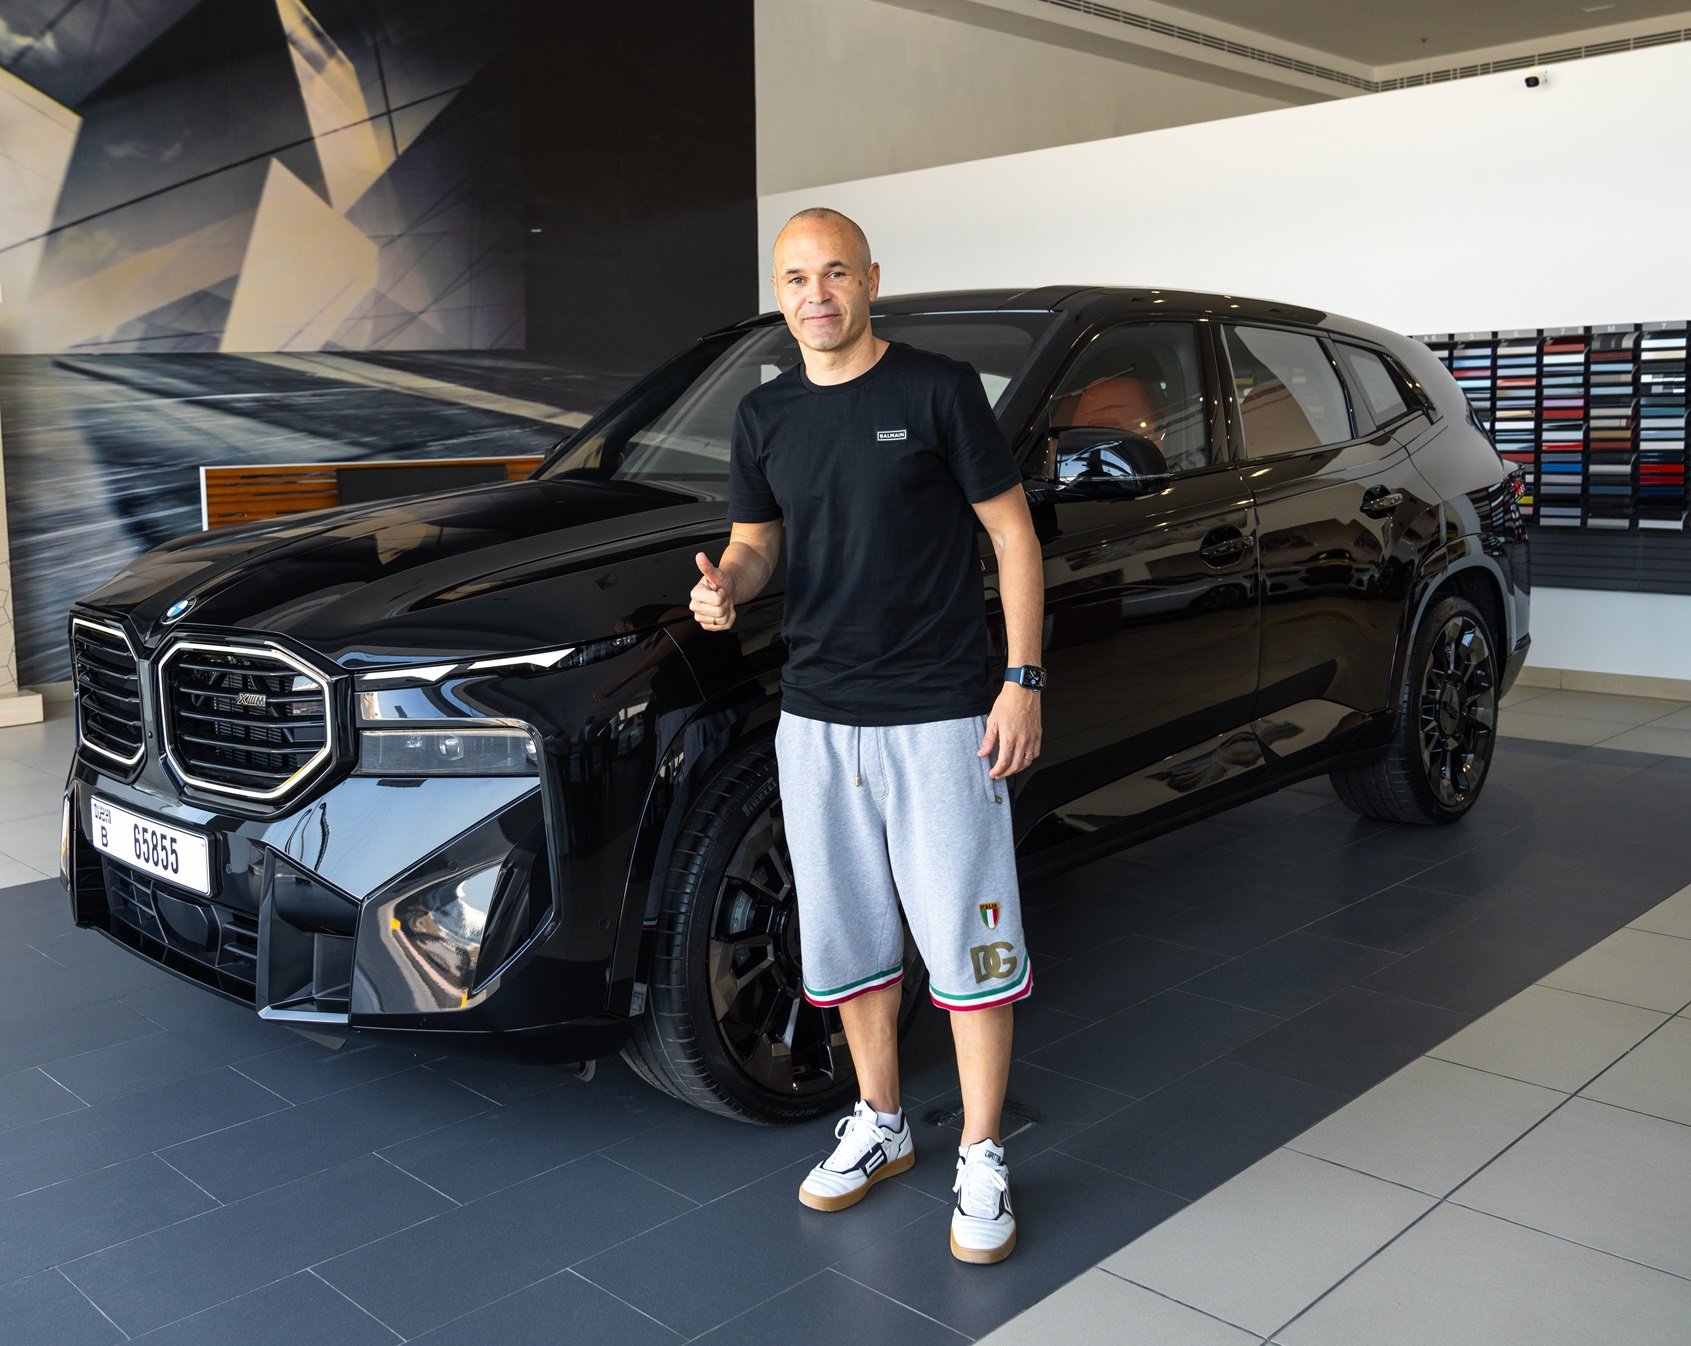 Football star Andres Iniesta takes the wheel of new BMW XM in UAE